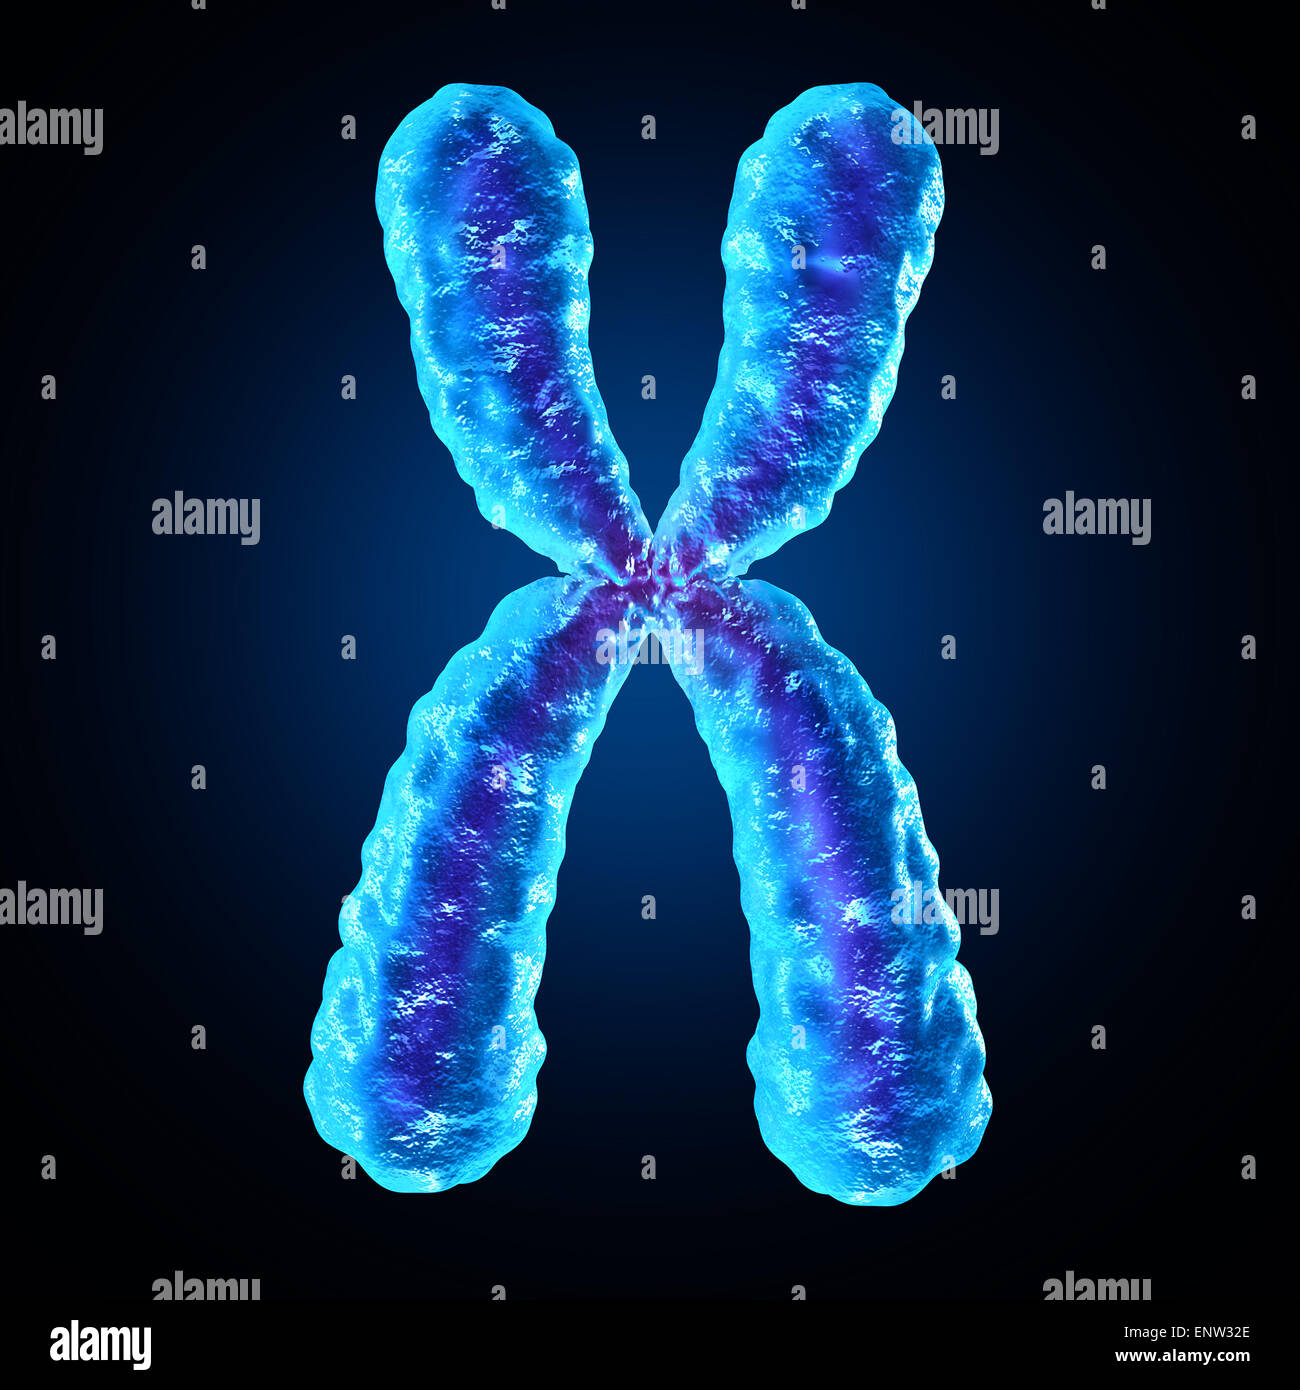 Chromosome as a human biology x structure containing dna genetic information as a medical symbol for gene therapy or microbiology genetics research. Stock Photo